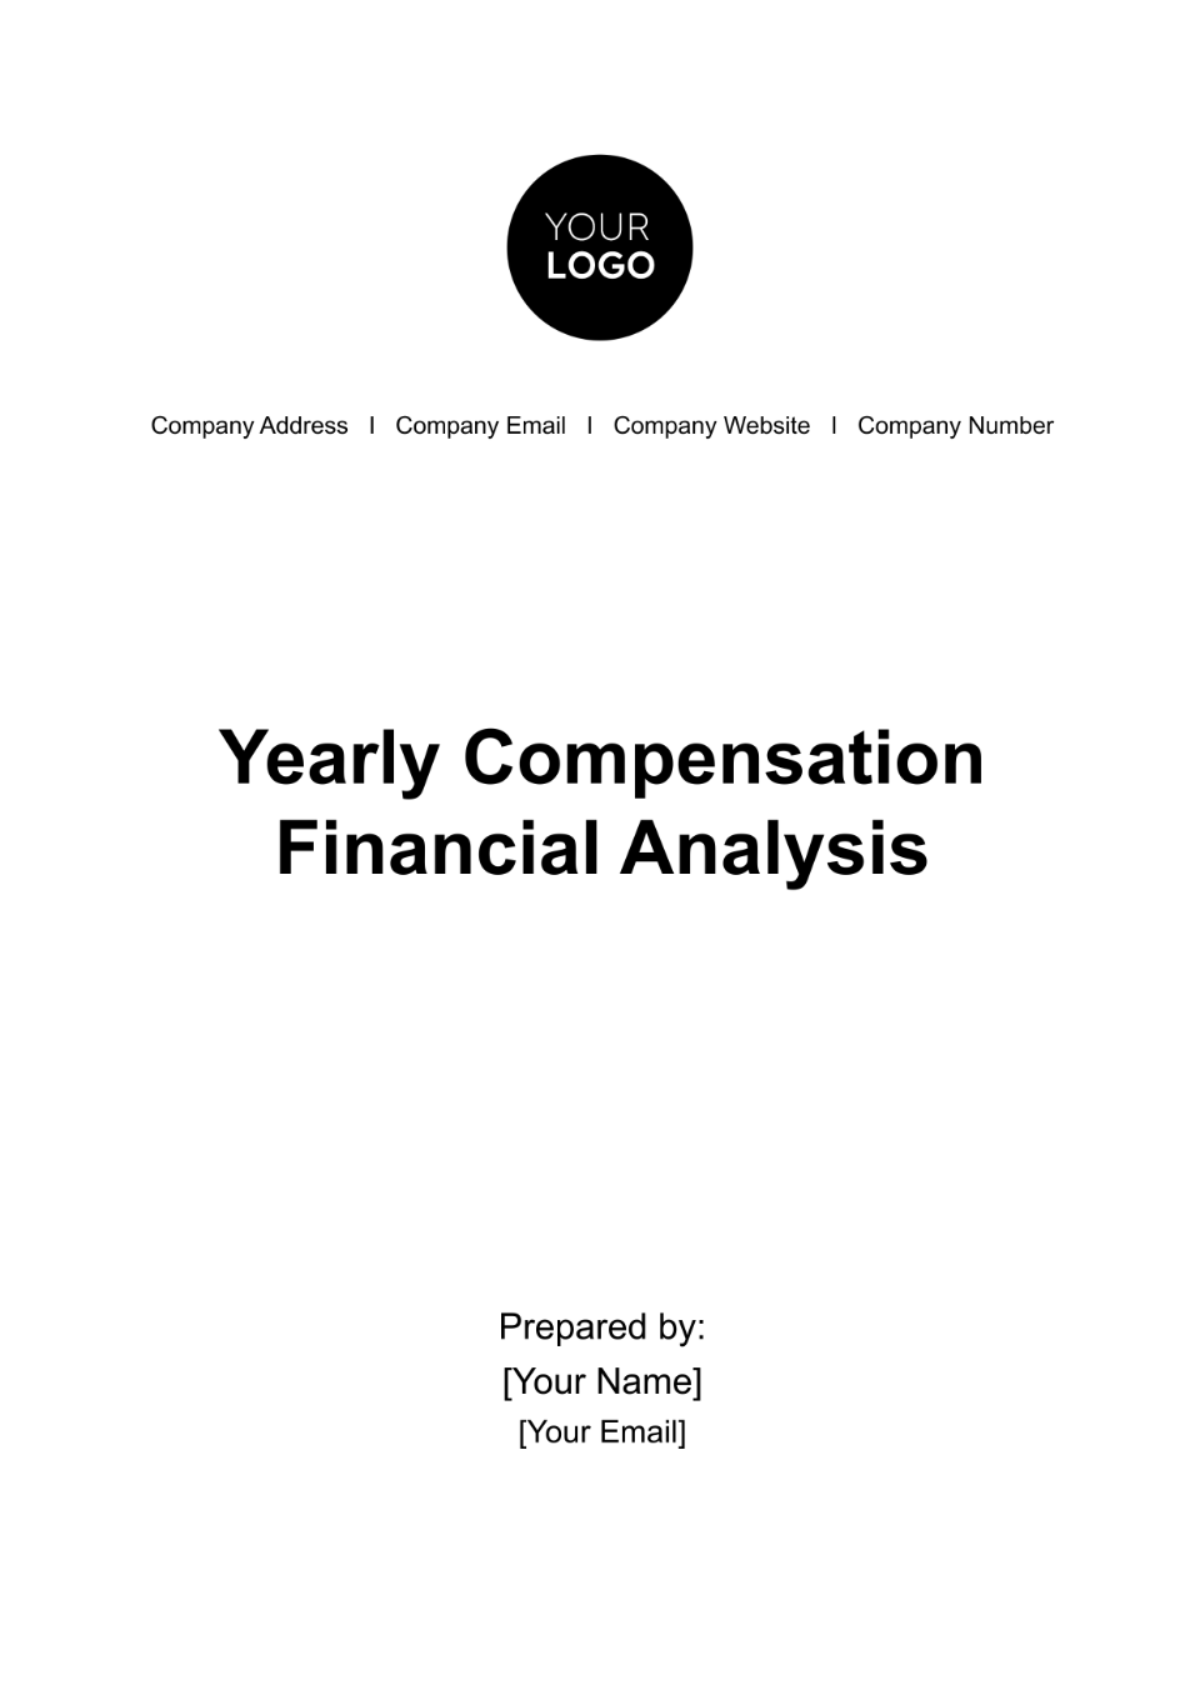 Yearly Compensation Financial Analysis HR Template